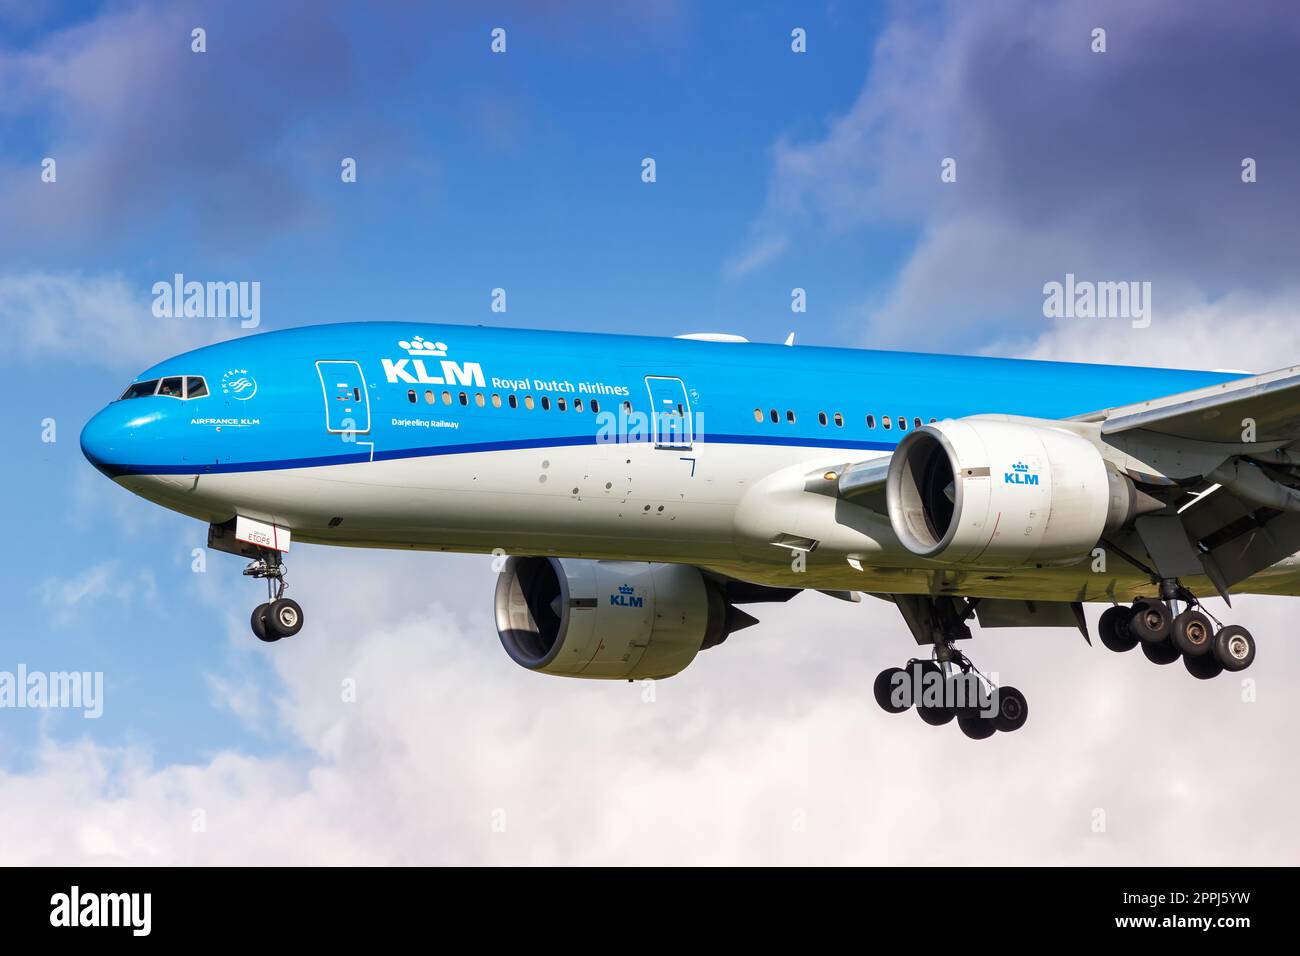 KLM Boeing 777-200ER airplane at Amsterdam Schiphol airport in the Netherlands Stock Photo